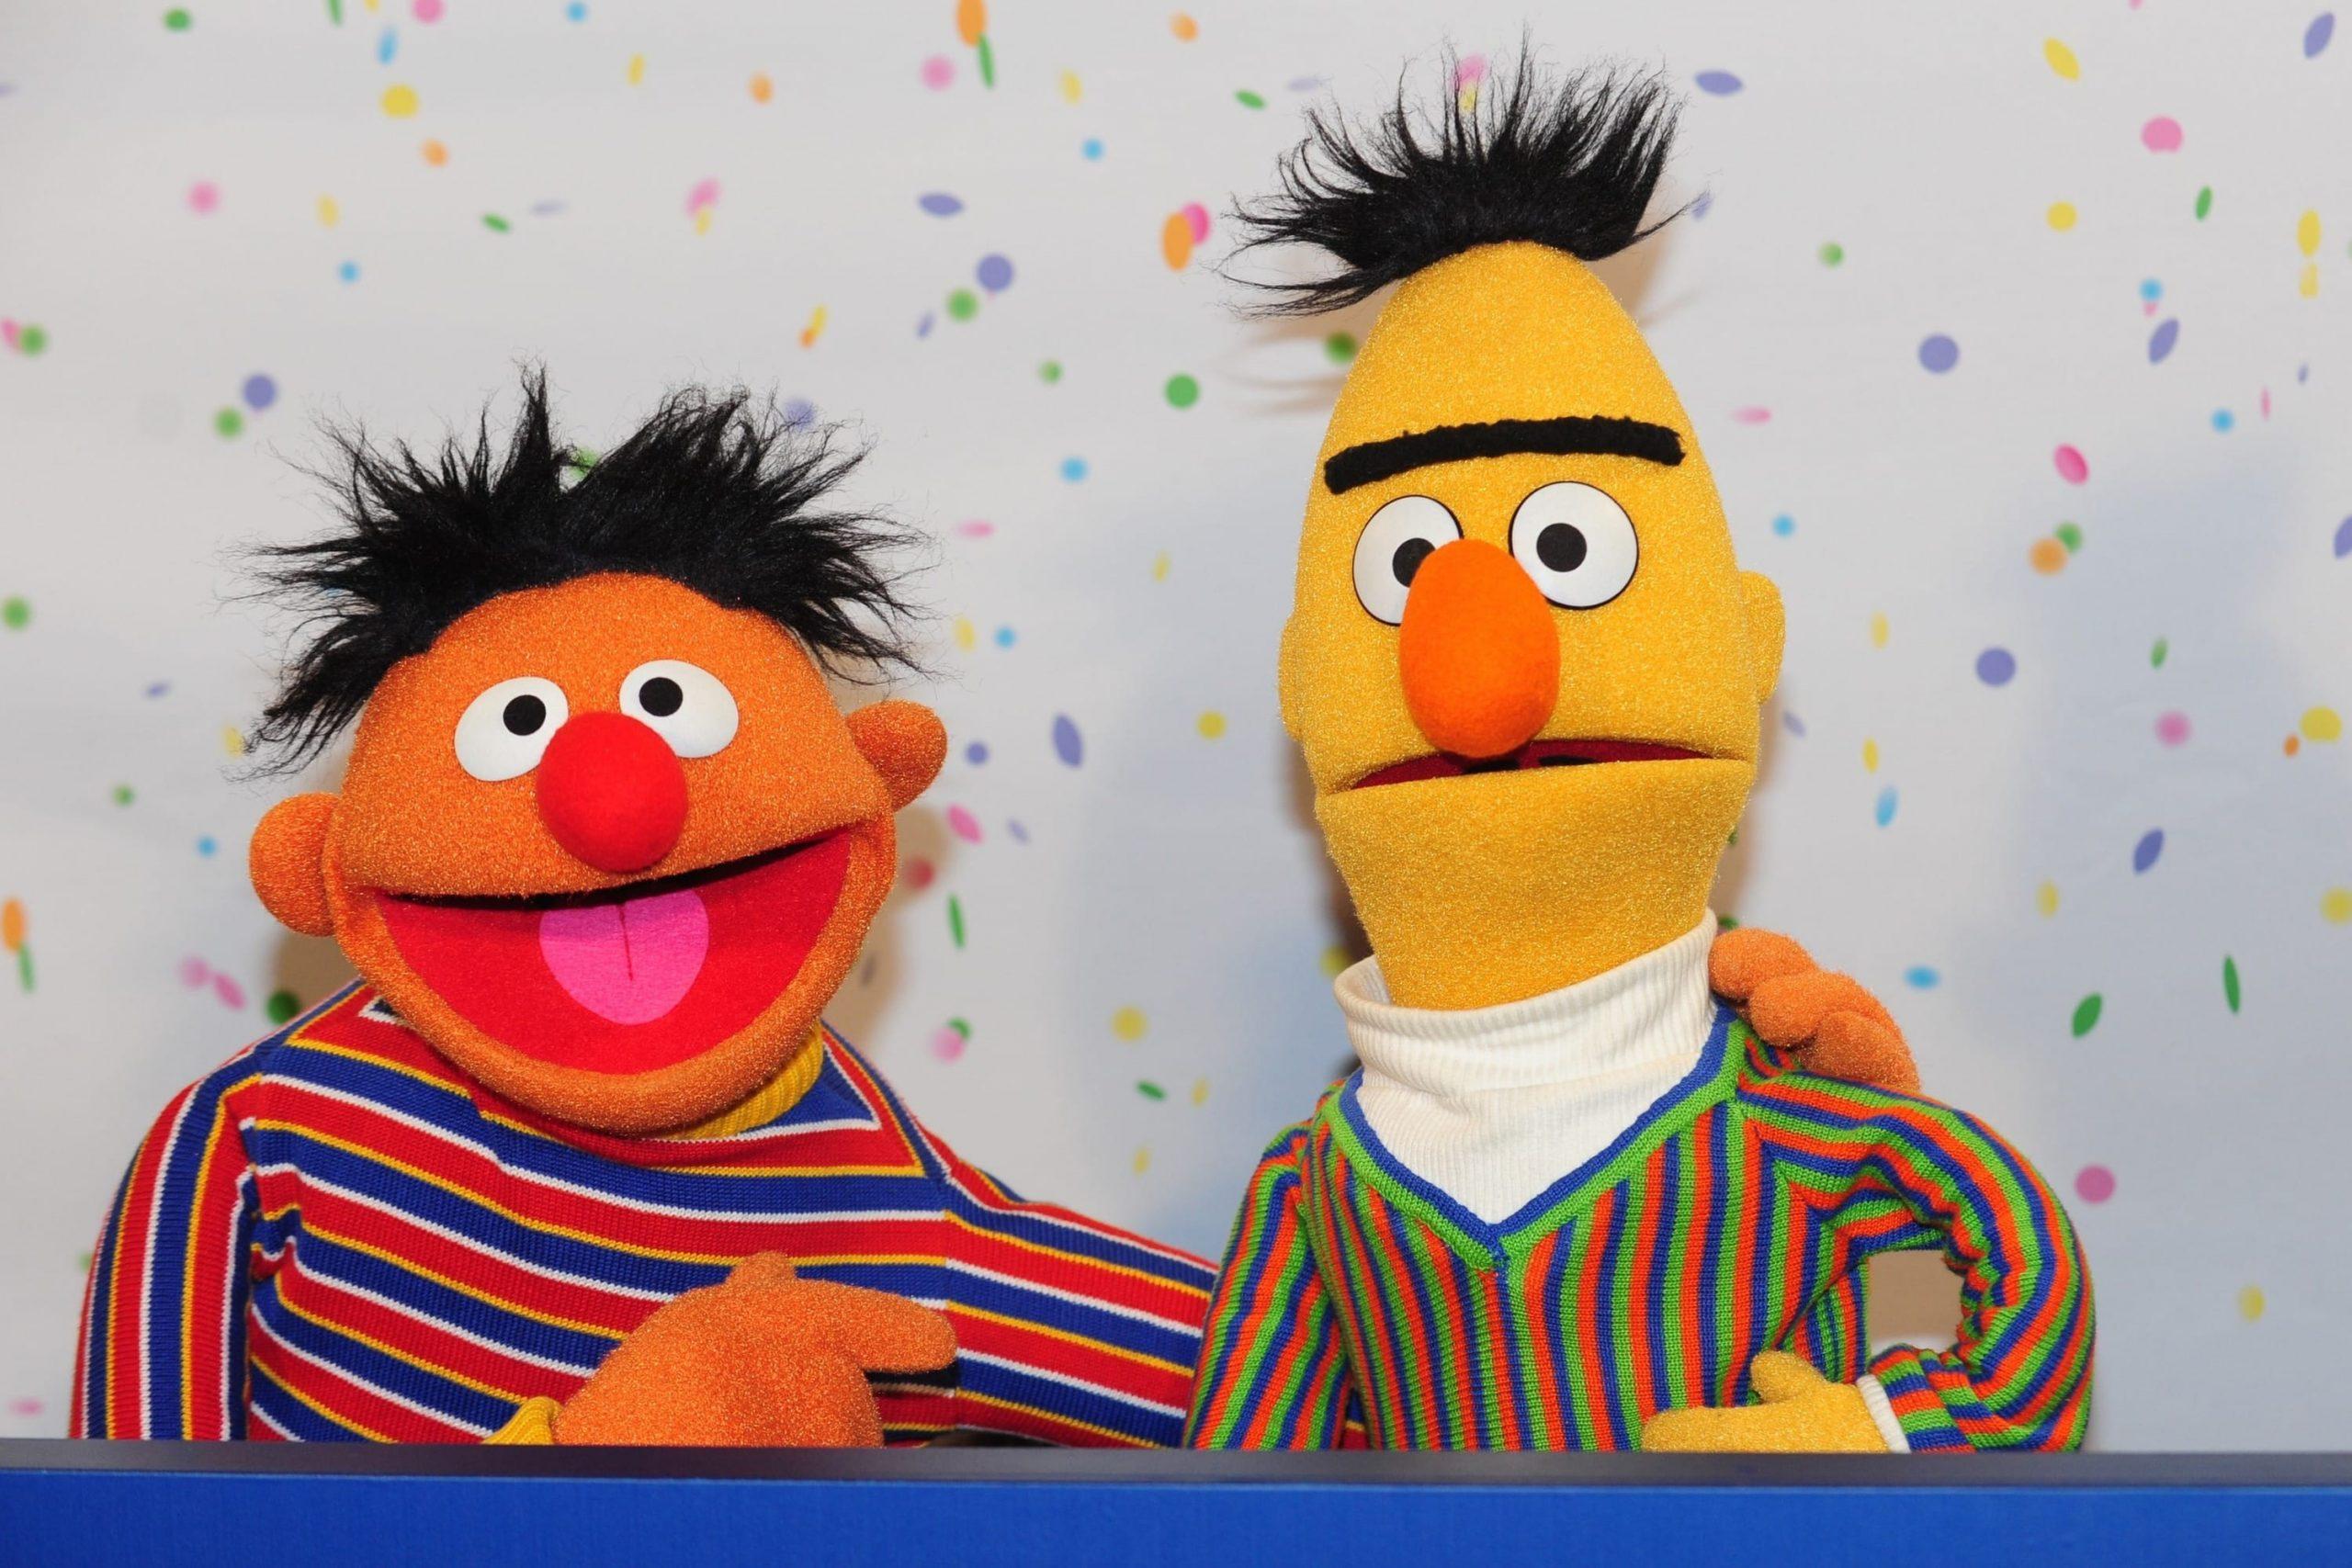 Friendship Lessons from Bert and Ernie, Zack and Slater, and More